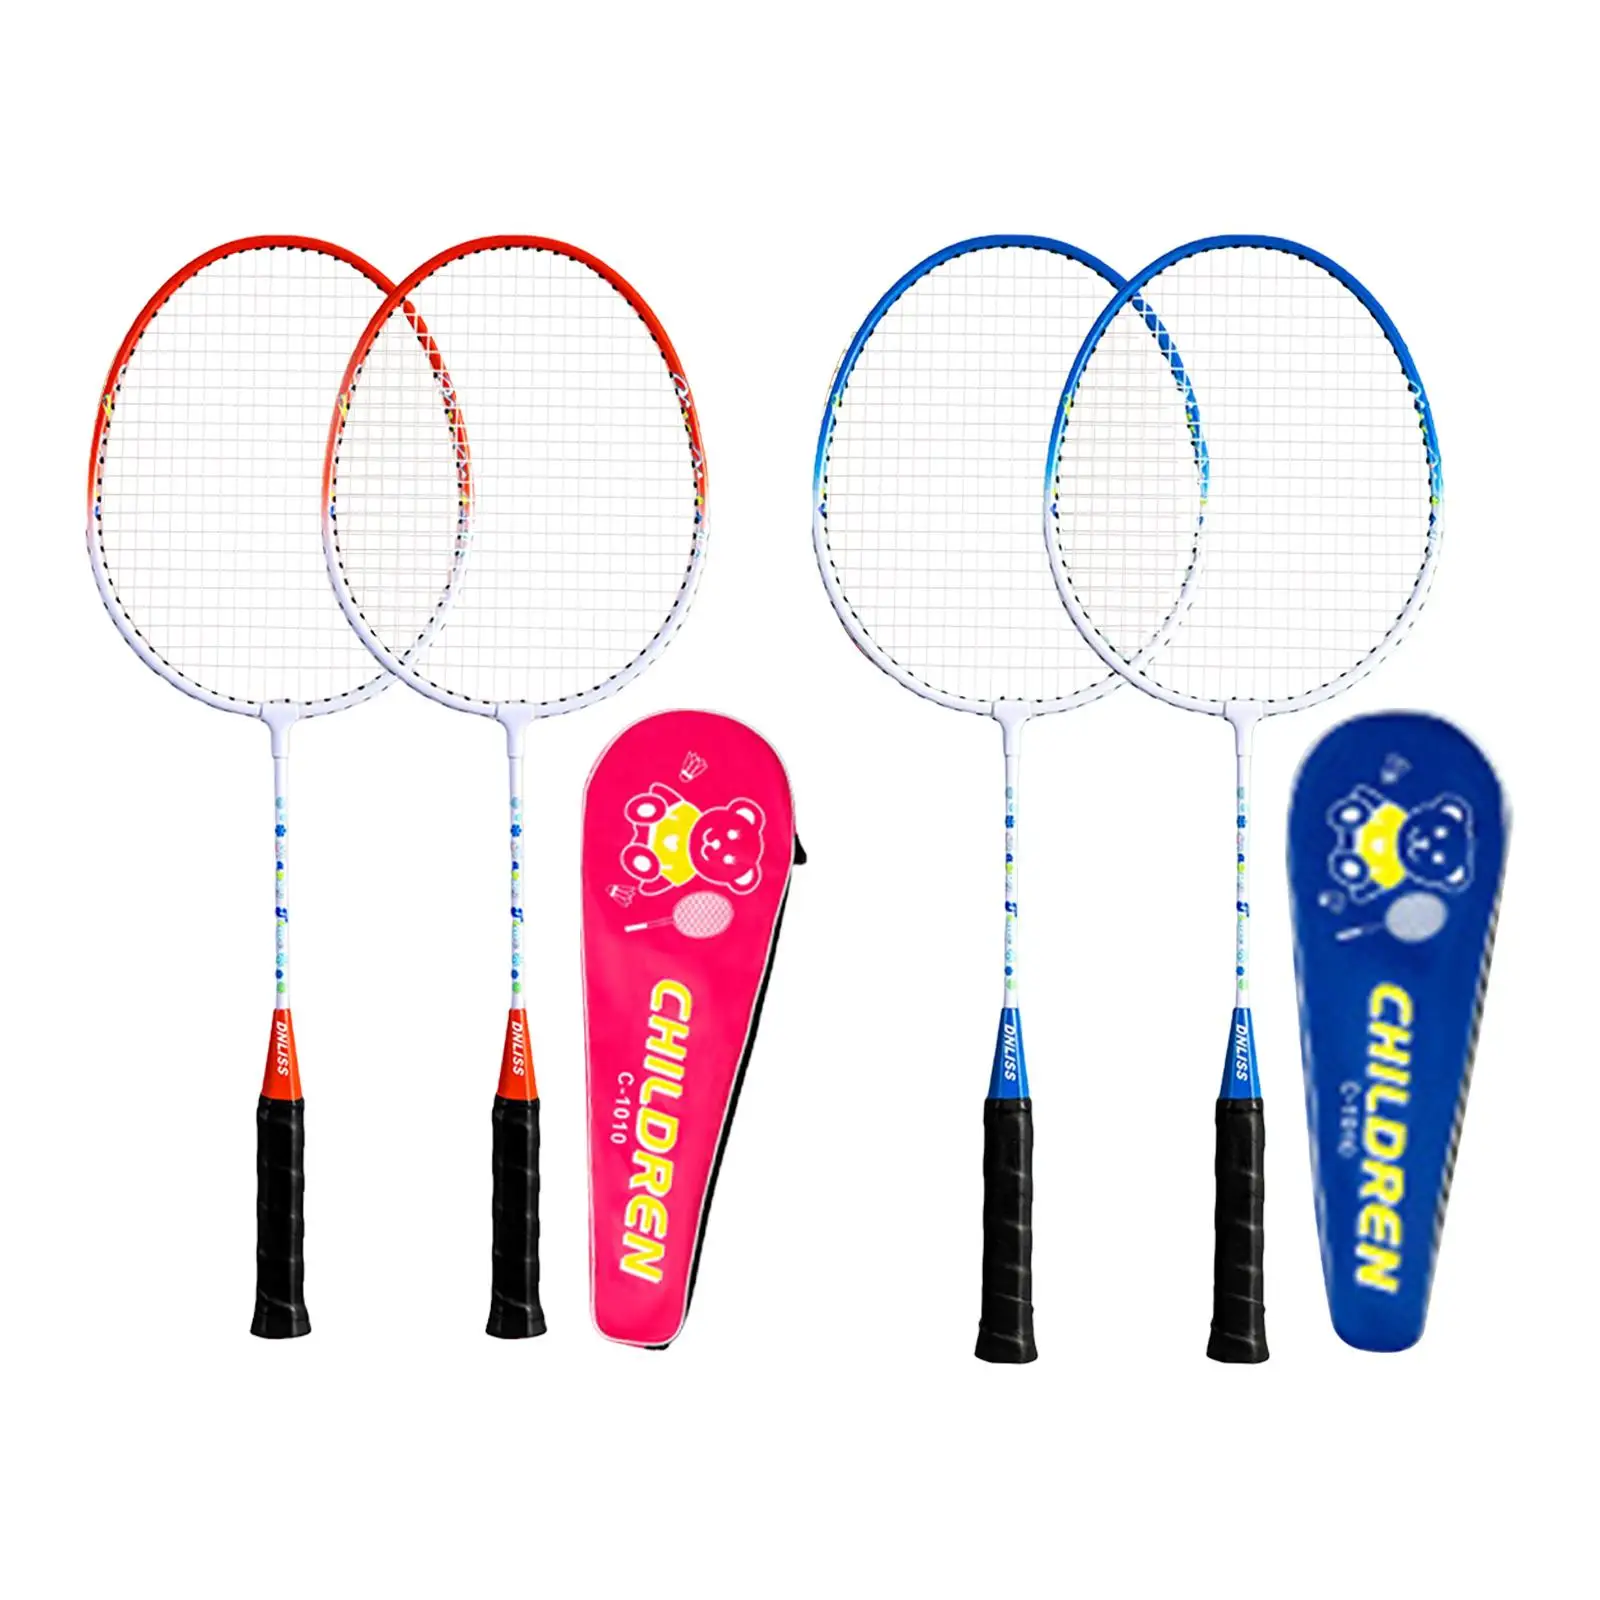 

2x Badminton Racket Sets with Carry Case Parentchild Interactive Toys Double Racquets for Games Indoor Outdoor Backyards Tennis